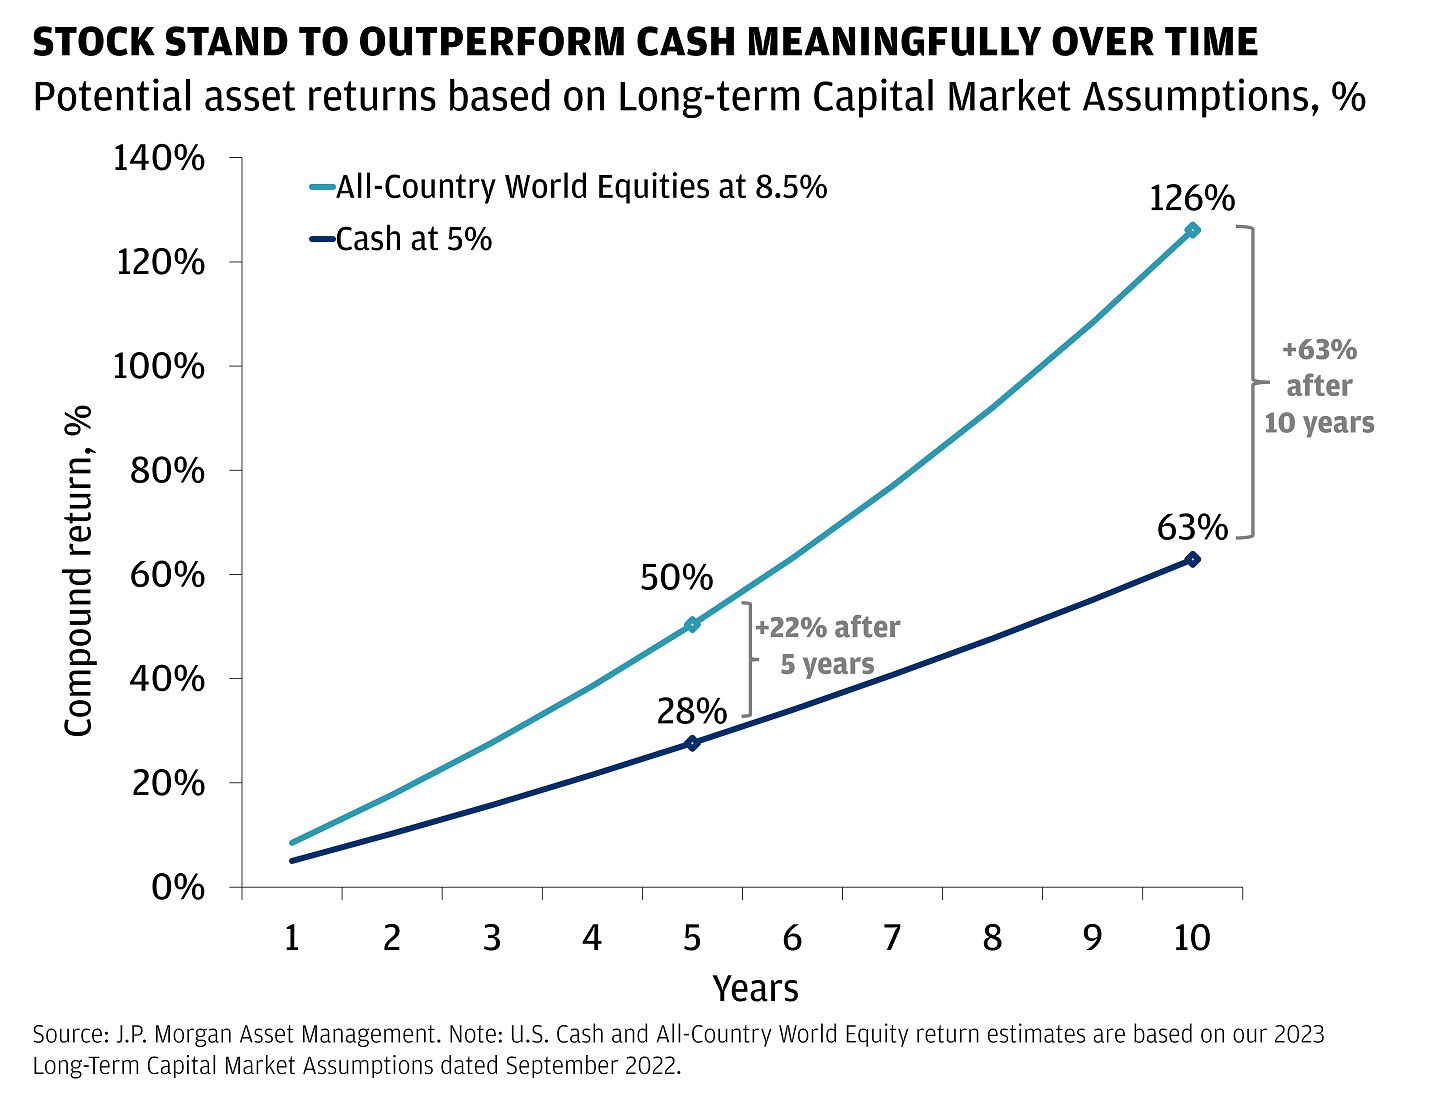 This chart shows the compounded returns of Cash and All-Country World Equities over the course of the next 10 years, assuming a 4.4% rate on Cash and 8.5% on the MSCI ACWI.